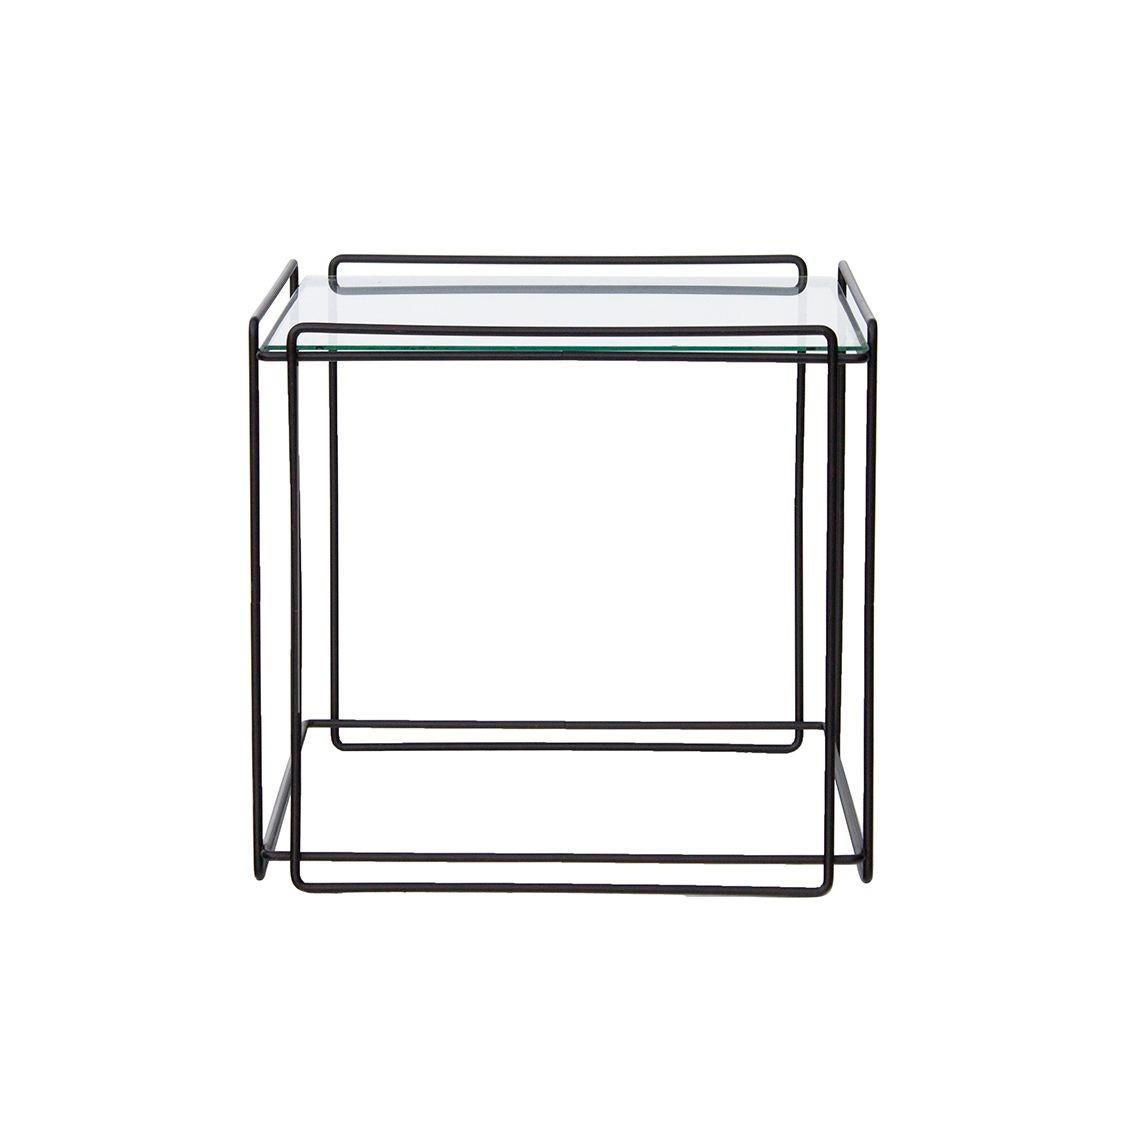 France, 1970s
Max Sauze 'isosceles' end table with glass top. Graphic line art for a space. Made by Atrow. Glass does not appear to be original. 
Condition notes: Overall, frame is in good condition with some light marks; glass tops have some